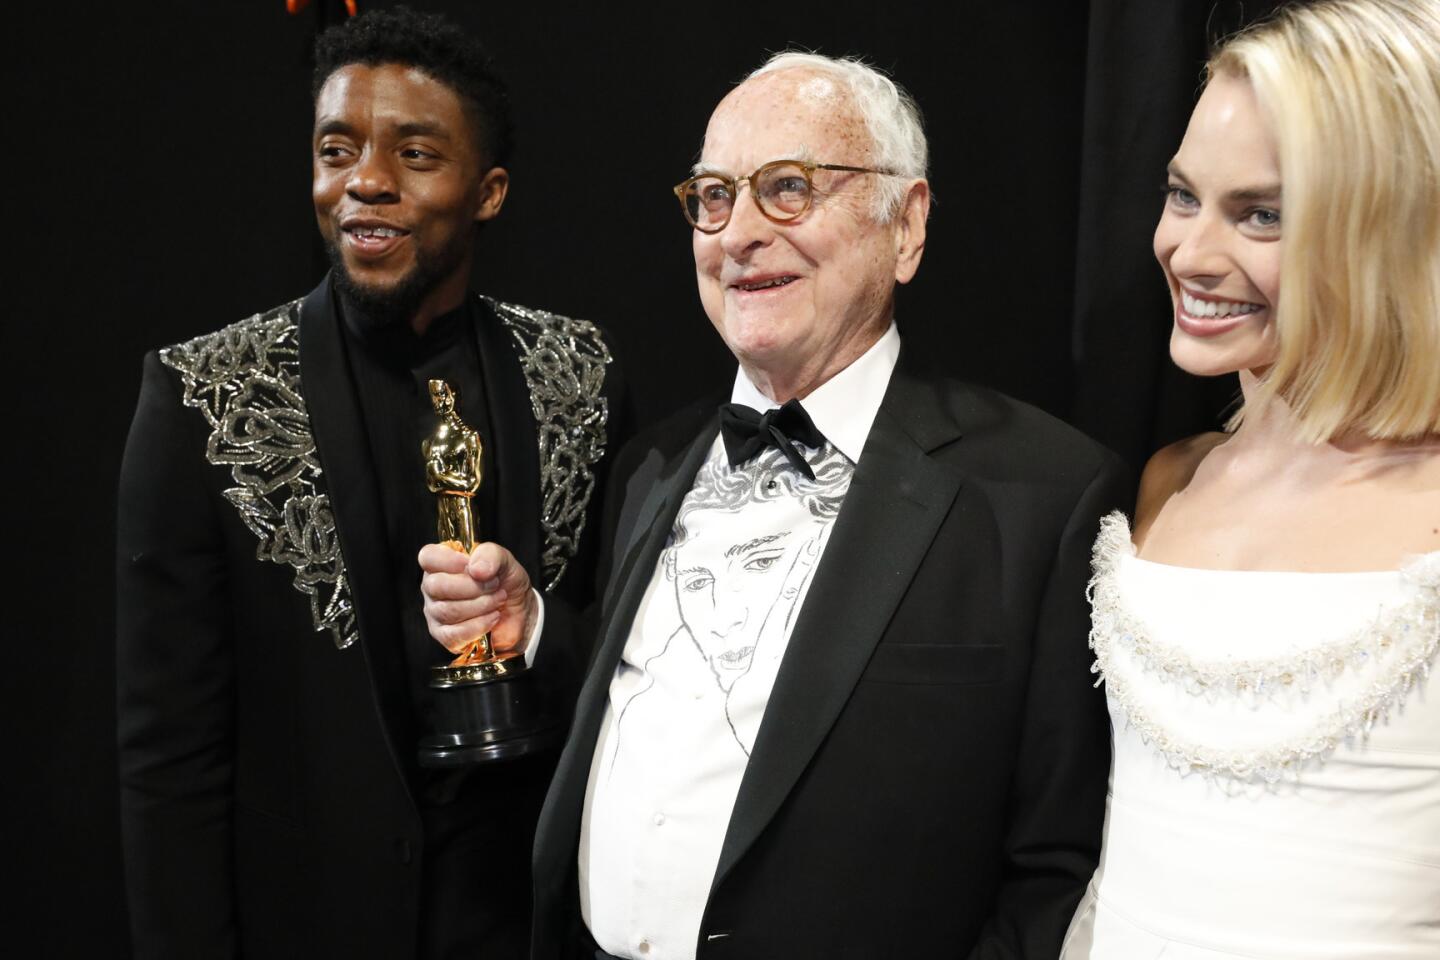 James Ivory with presenters Chadwick Boseman, left, and Margot Robbie after winning for adapted screenplay for "Call Me by Your Name" backstage at the 90th Academy Awards on Sunday at the Dolby Theatre in Hollywood.